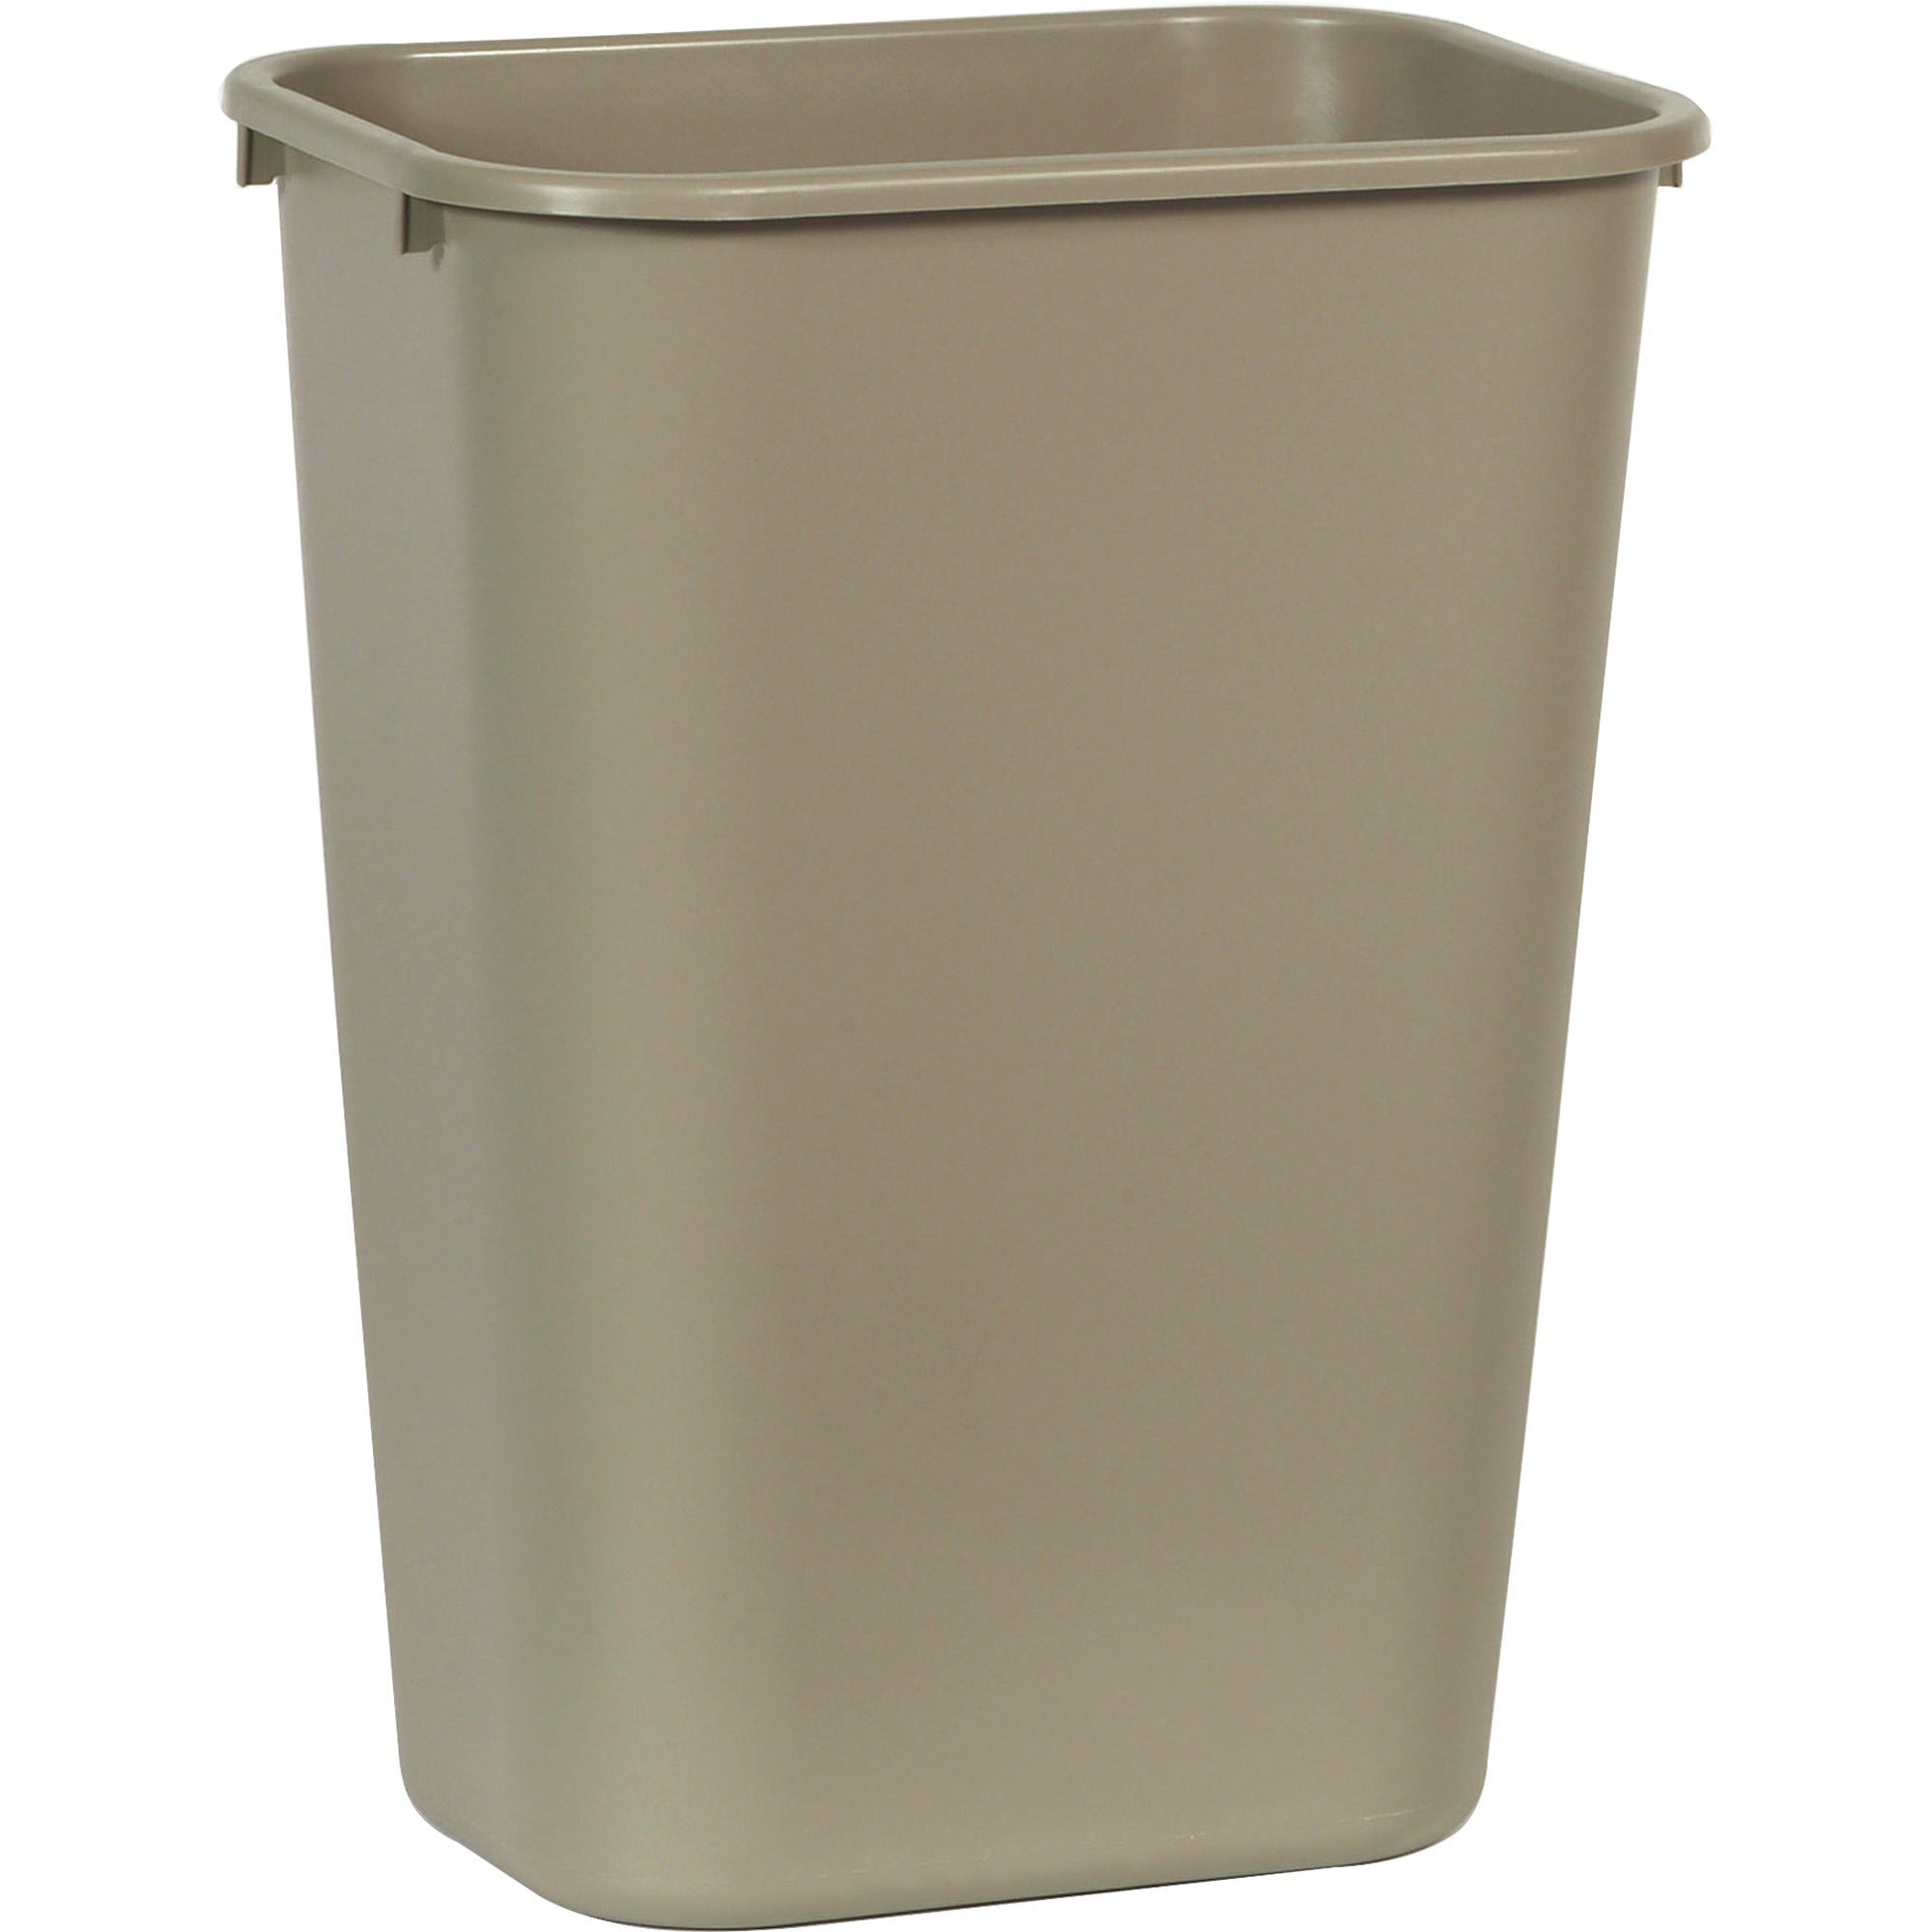 rubbermaid-commercial-41-qt-large-deskside-wastebaskets-1025-gal-capacity-rectangular-dent-resistant-durable-rust-resistant-easy-to-clean-20-height-x-113-width-x-153-depth-plastic-beige-12-carton_rcp295700bgct - 1